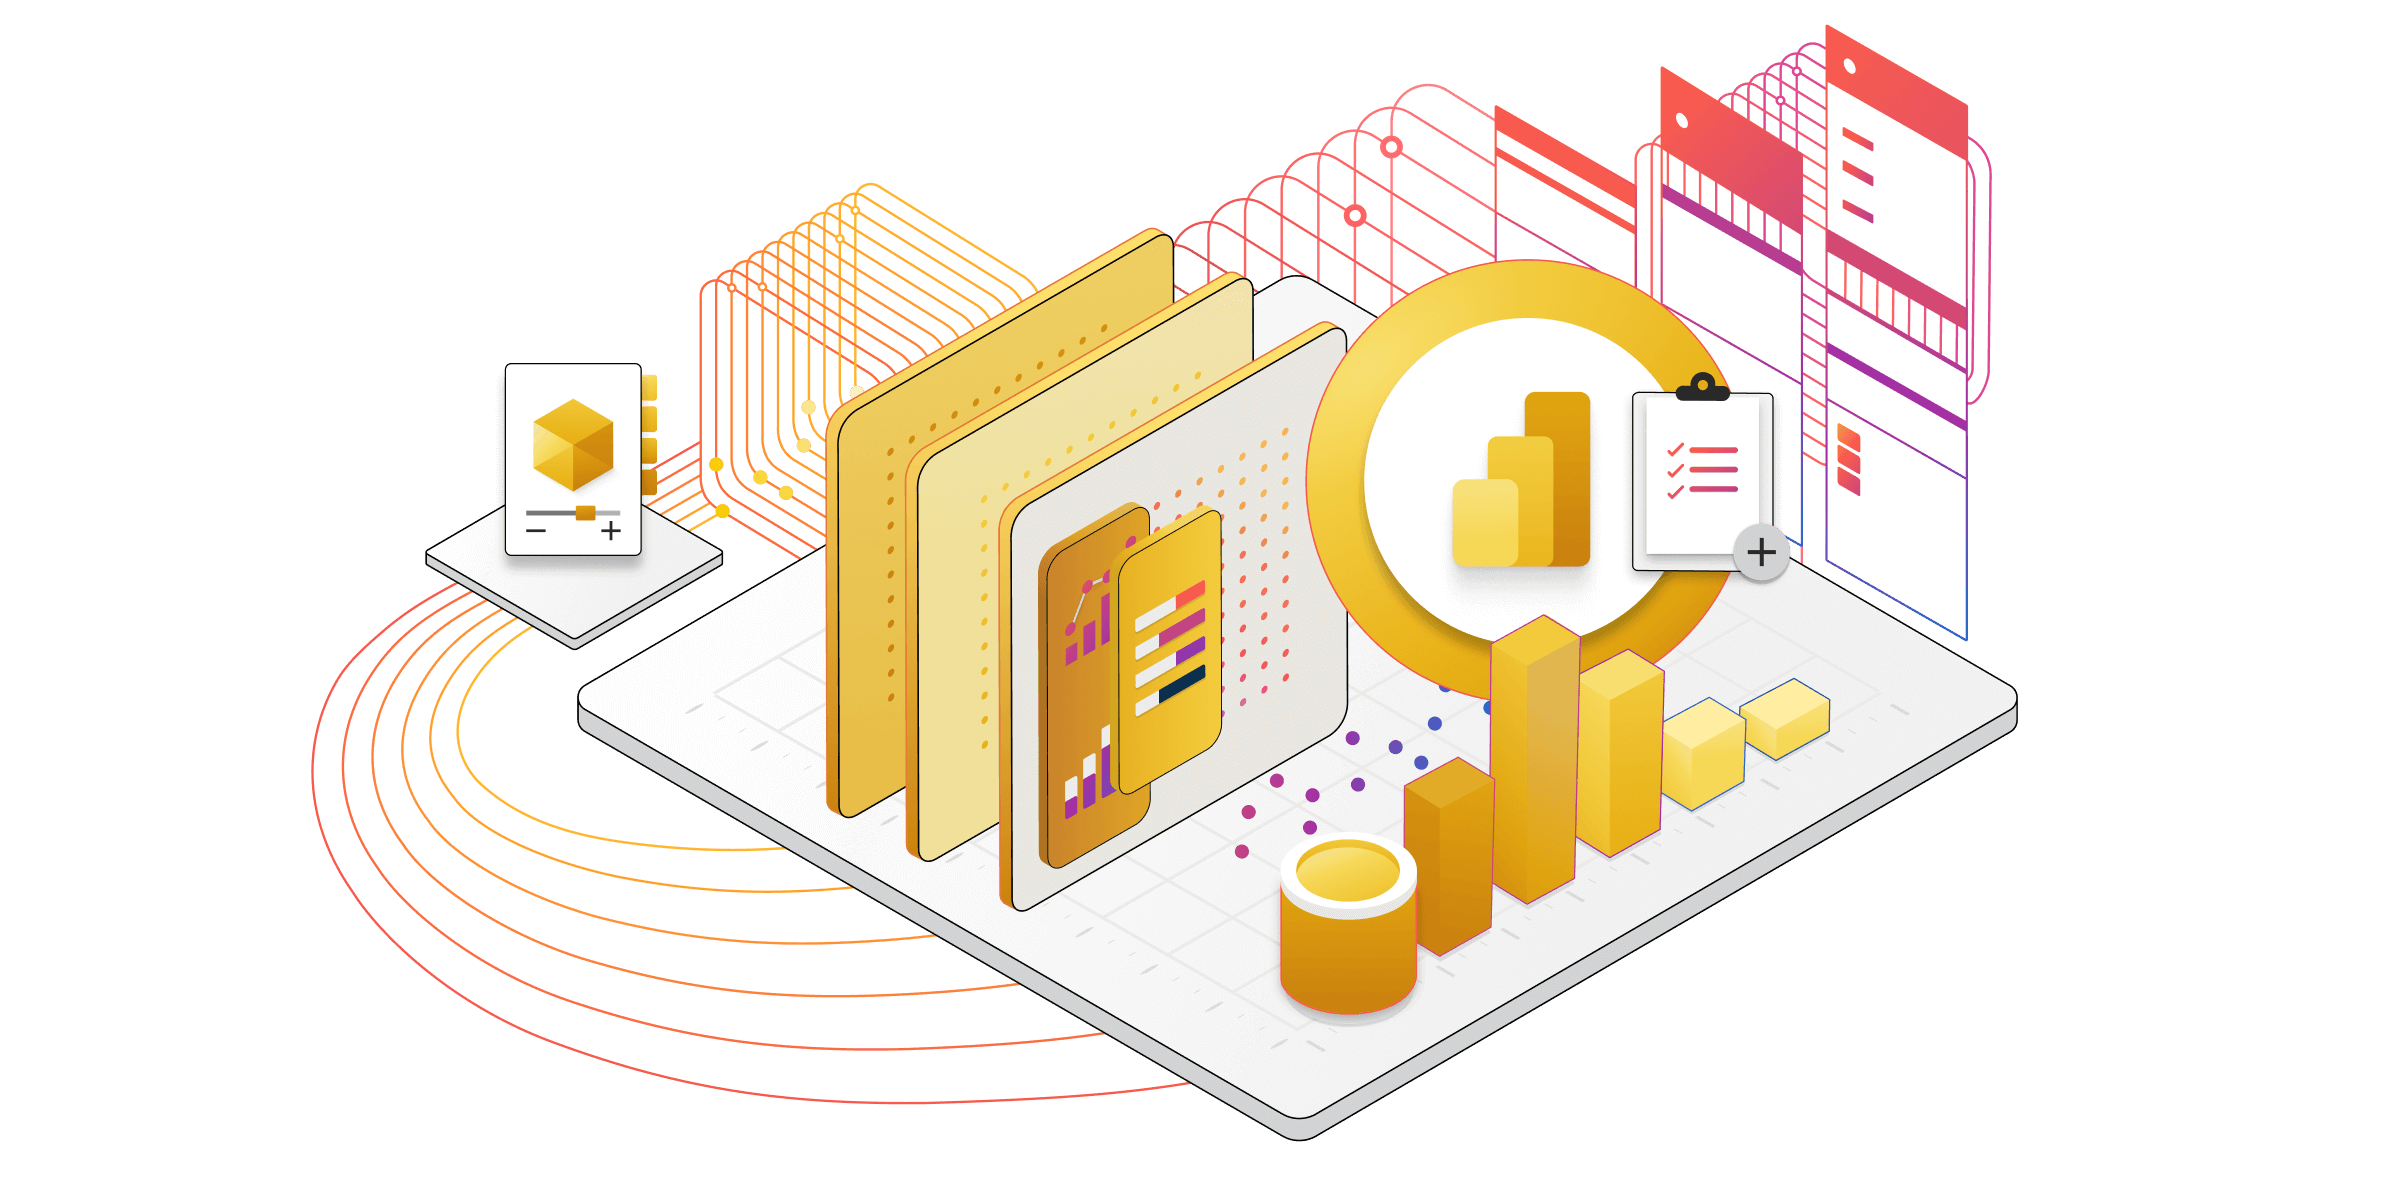 An isometric illustration of technical components for Power Bi services.